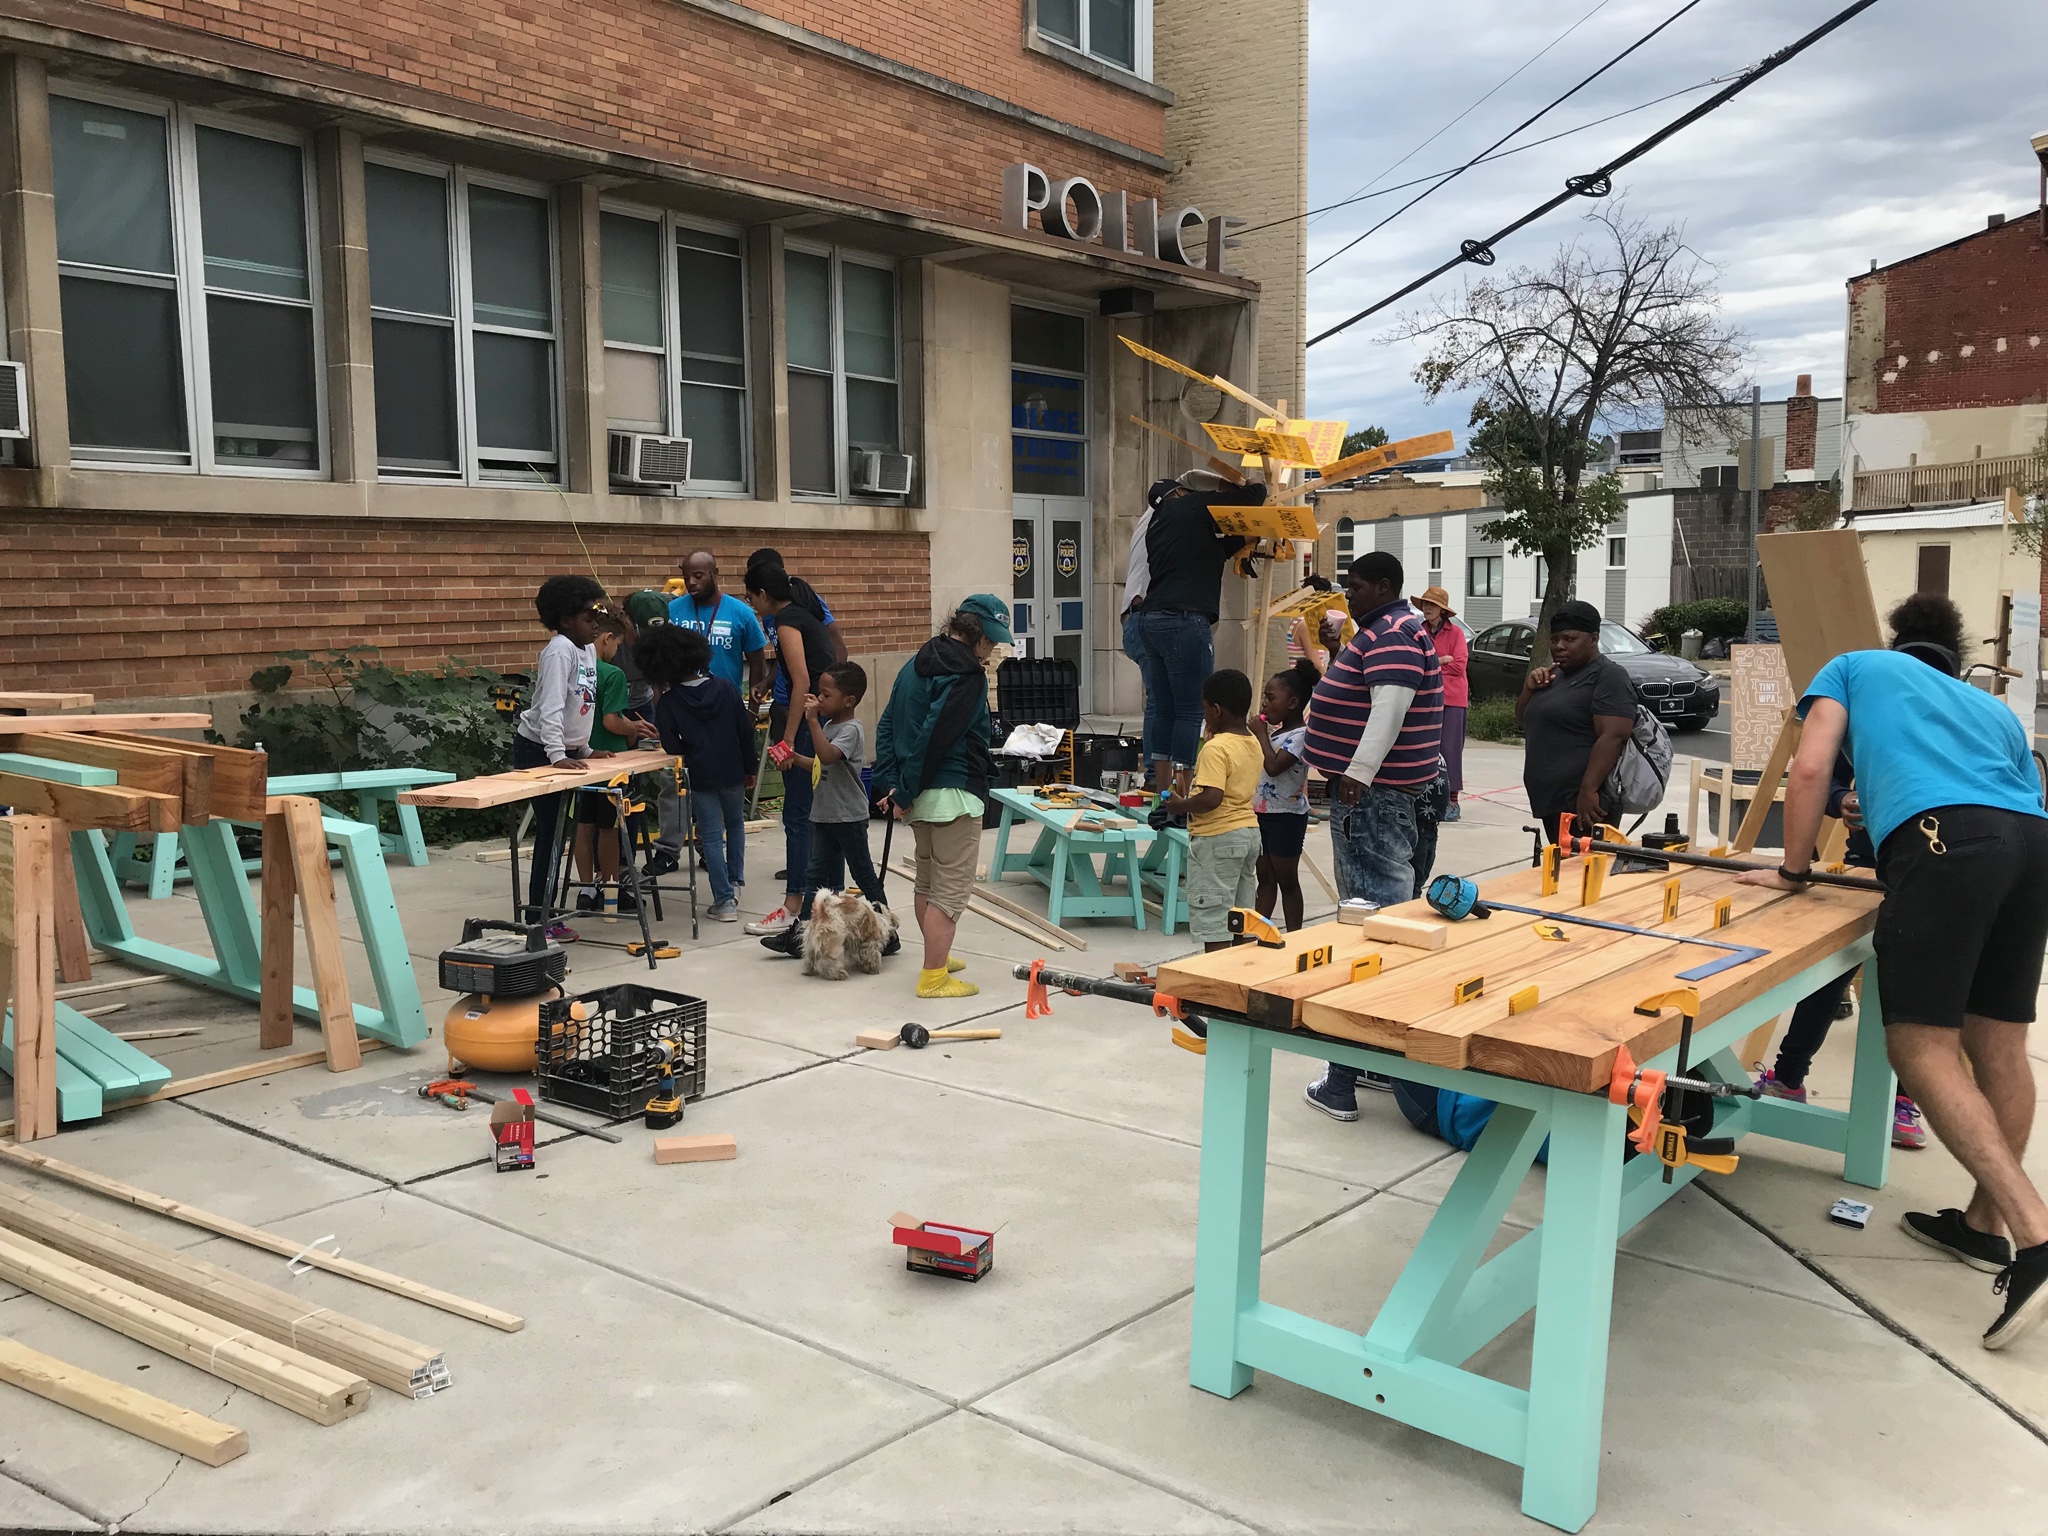 Tiny WPA leads community memebers in constructing picnic tables in front of the 16th Police District building